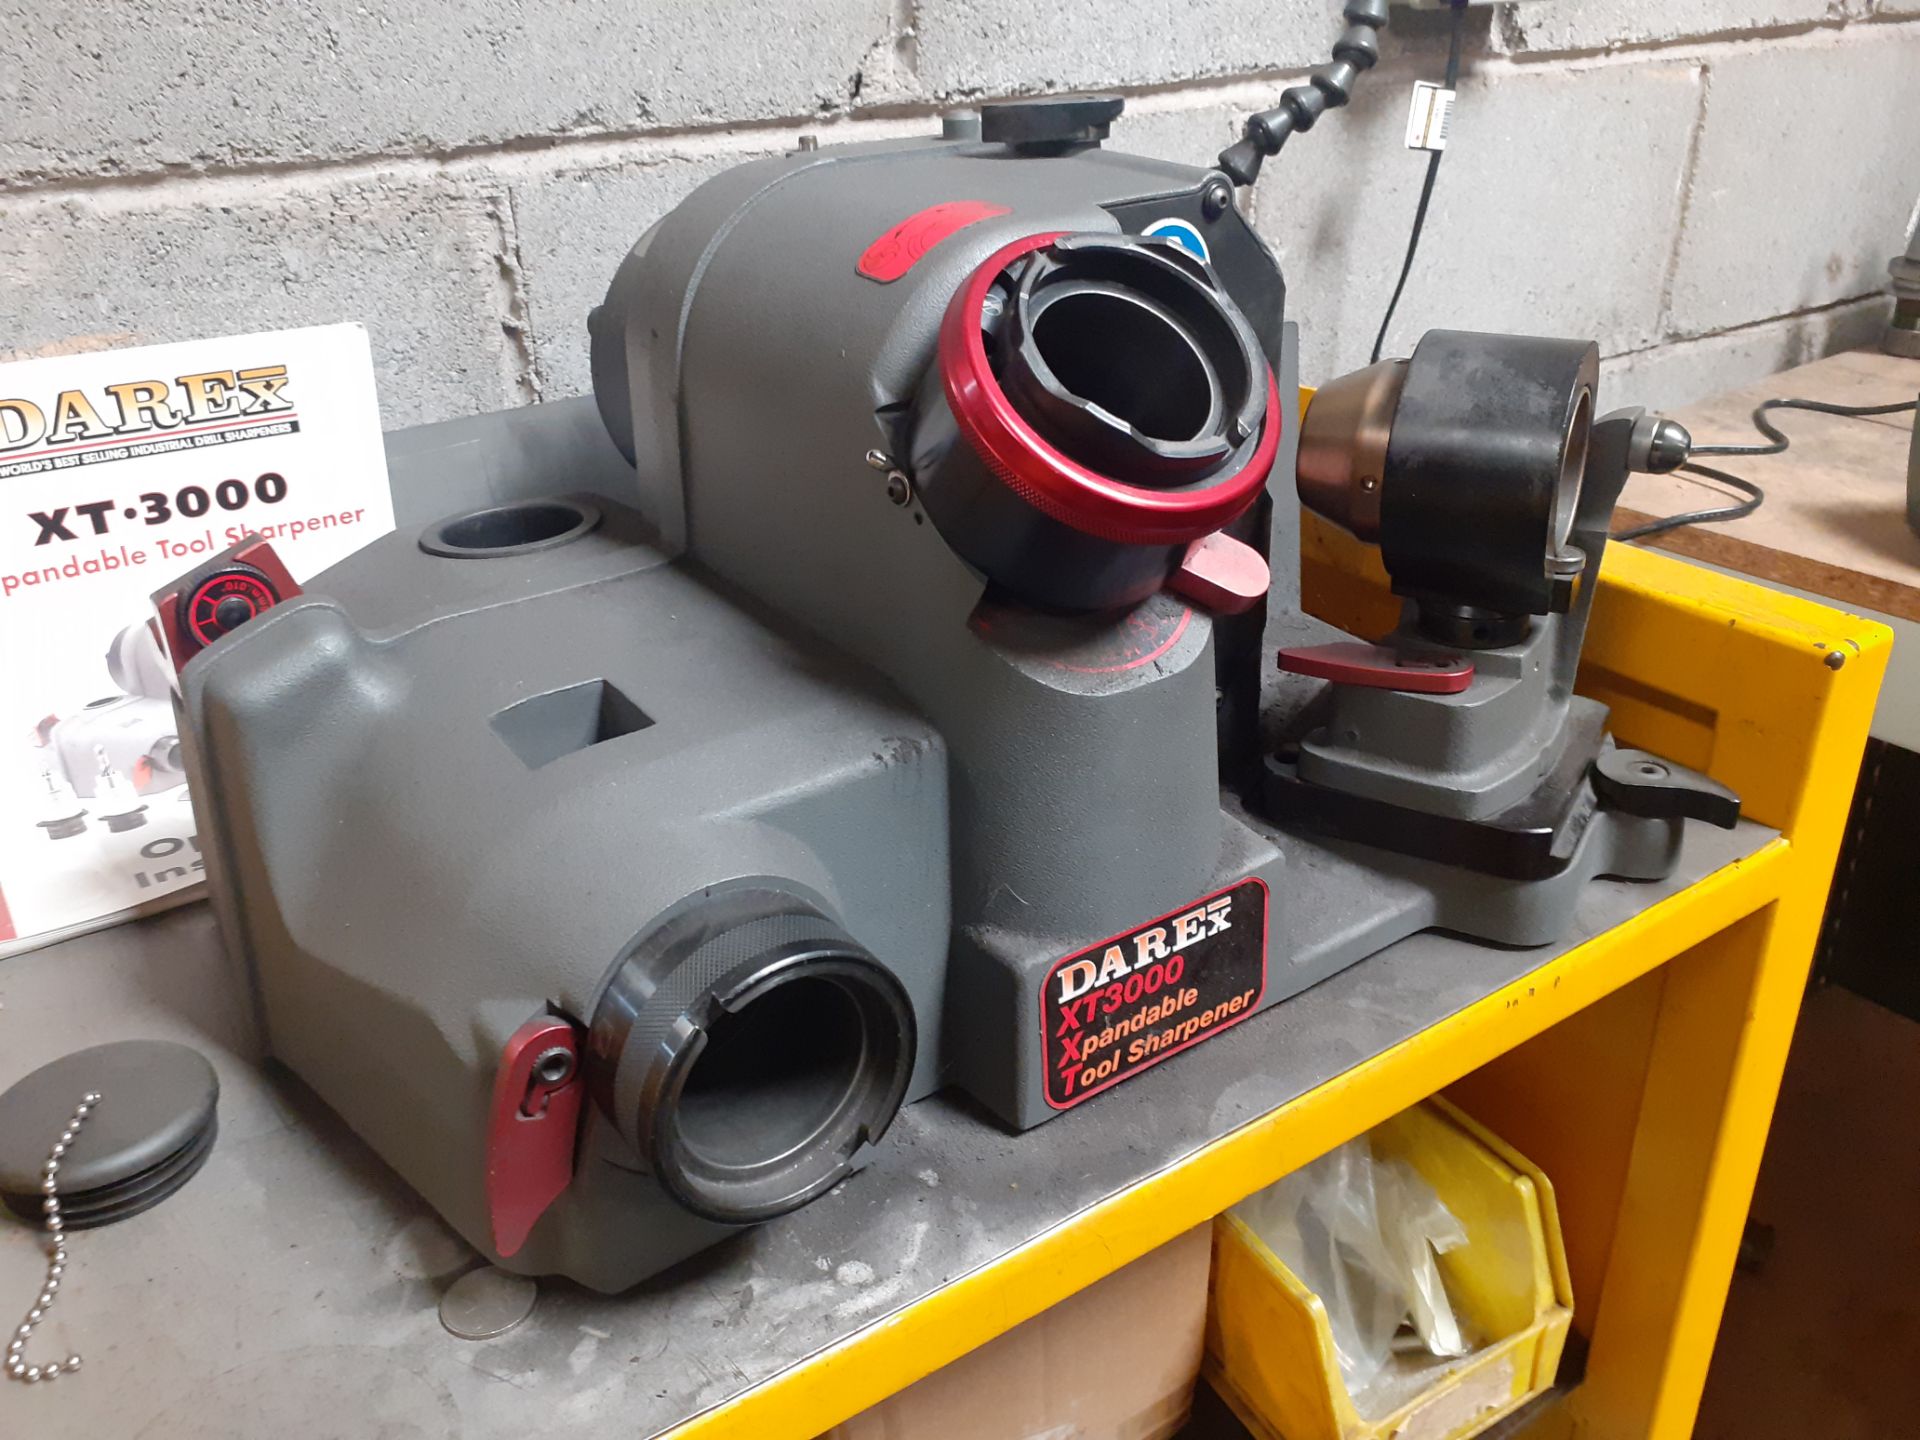 Darex XT3000 Xpandable Tool Sharpener on stand - Image 2 of 2